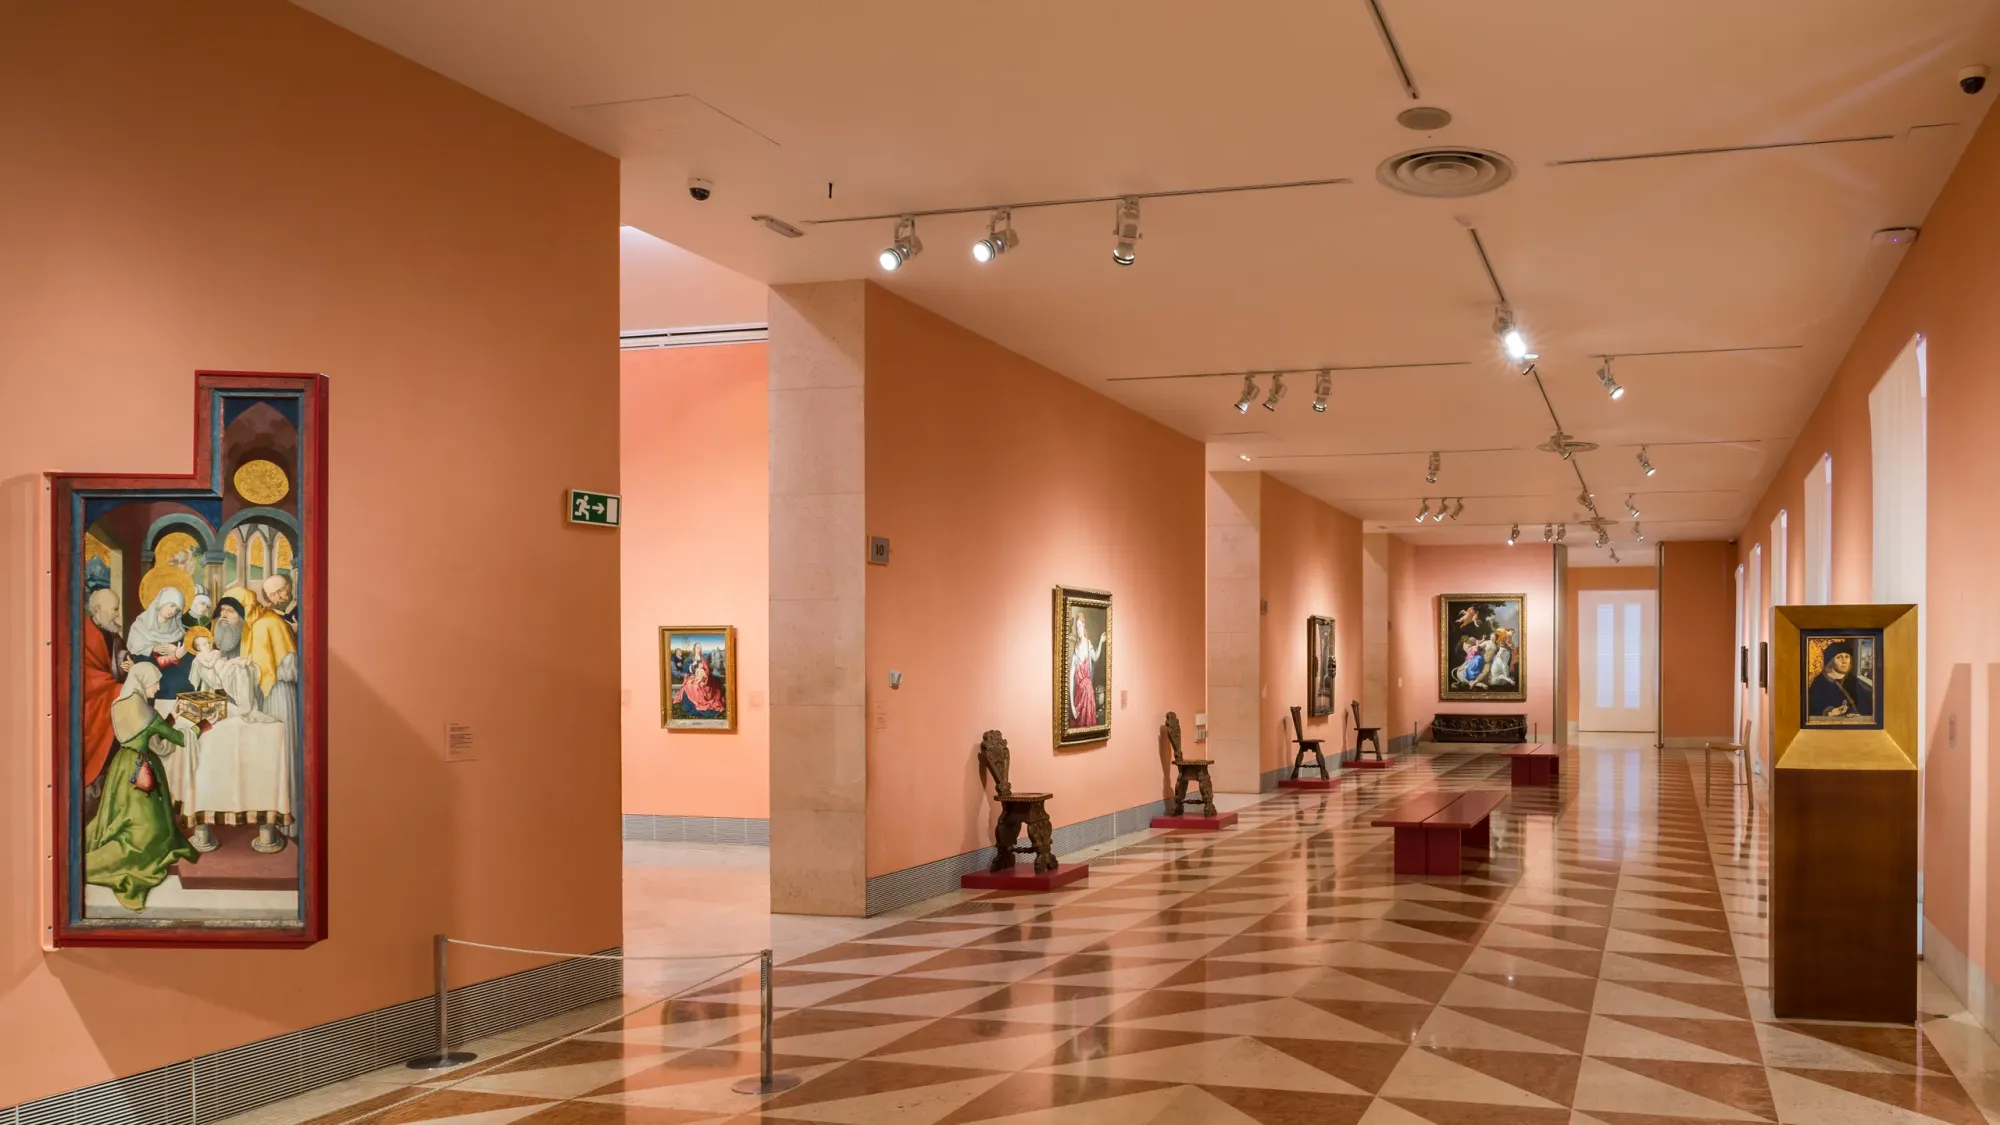 Top Attractions To See In Madrid - Thyssen-Bornemisza Museum